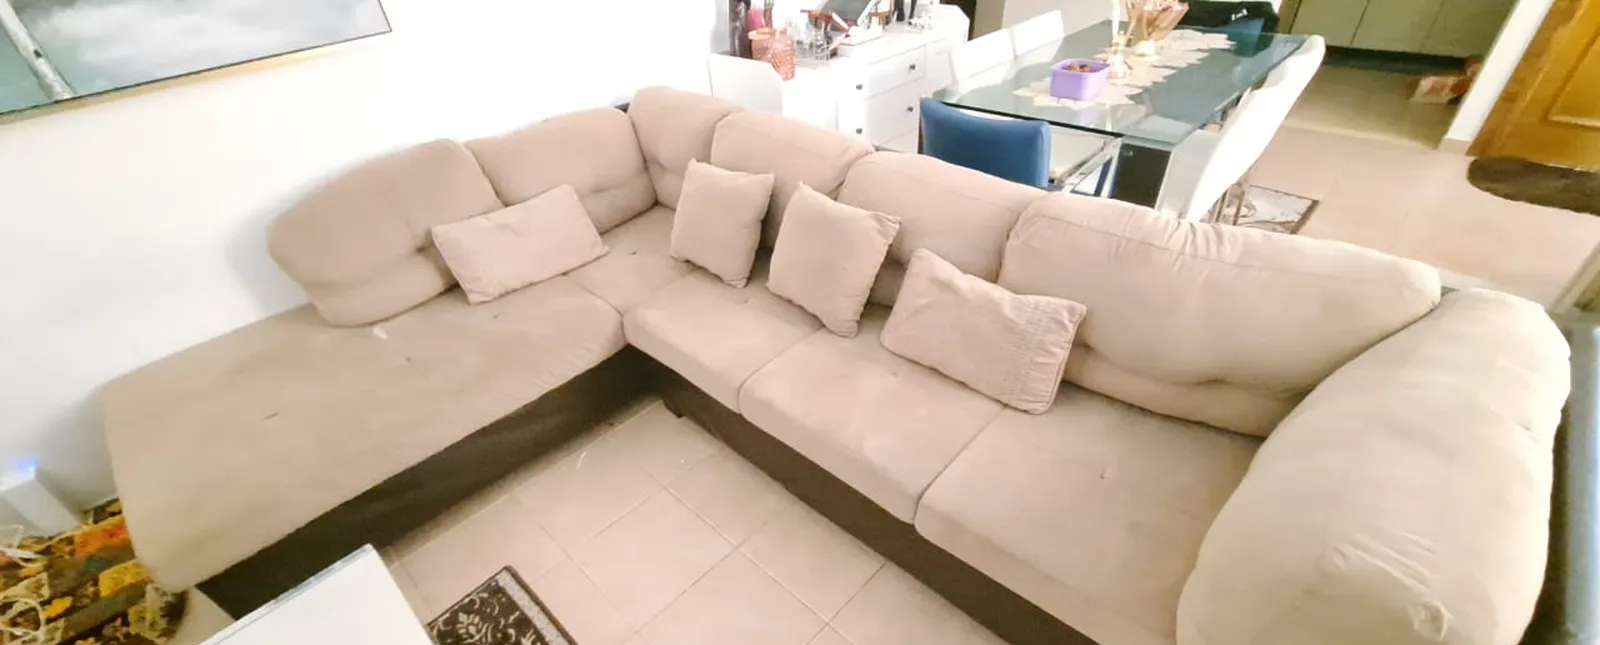 PAN EMIRATES 2 x SINGLE and L Shape 6 Seater Sofa Sets in good condition